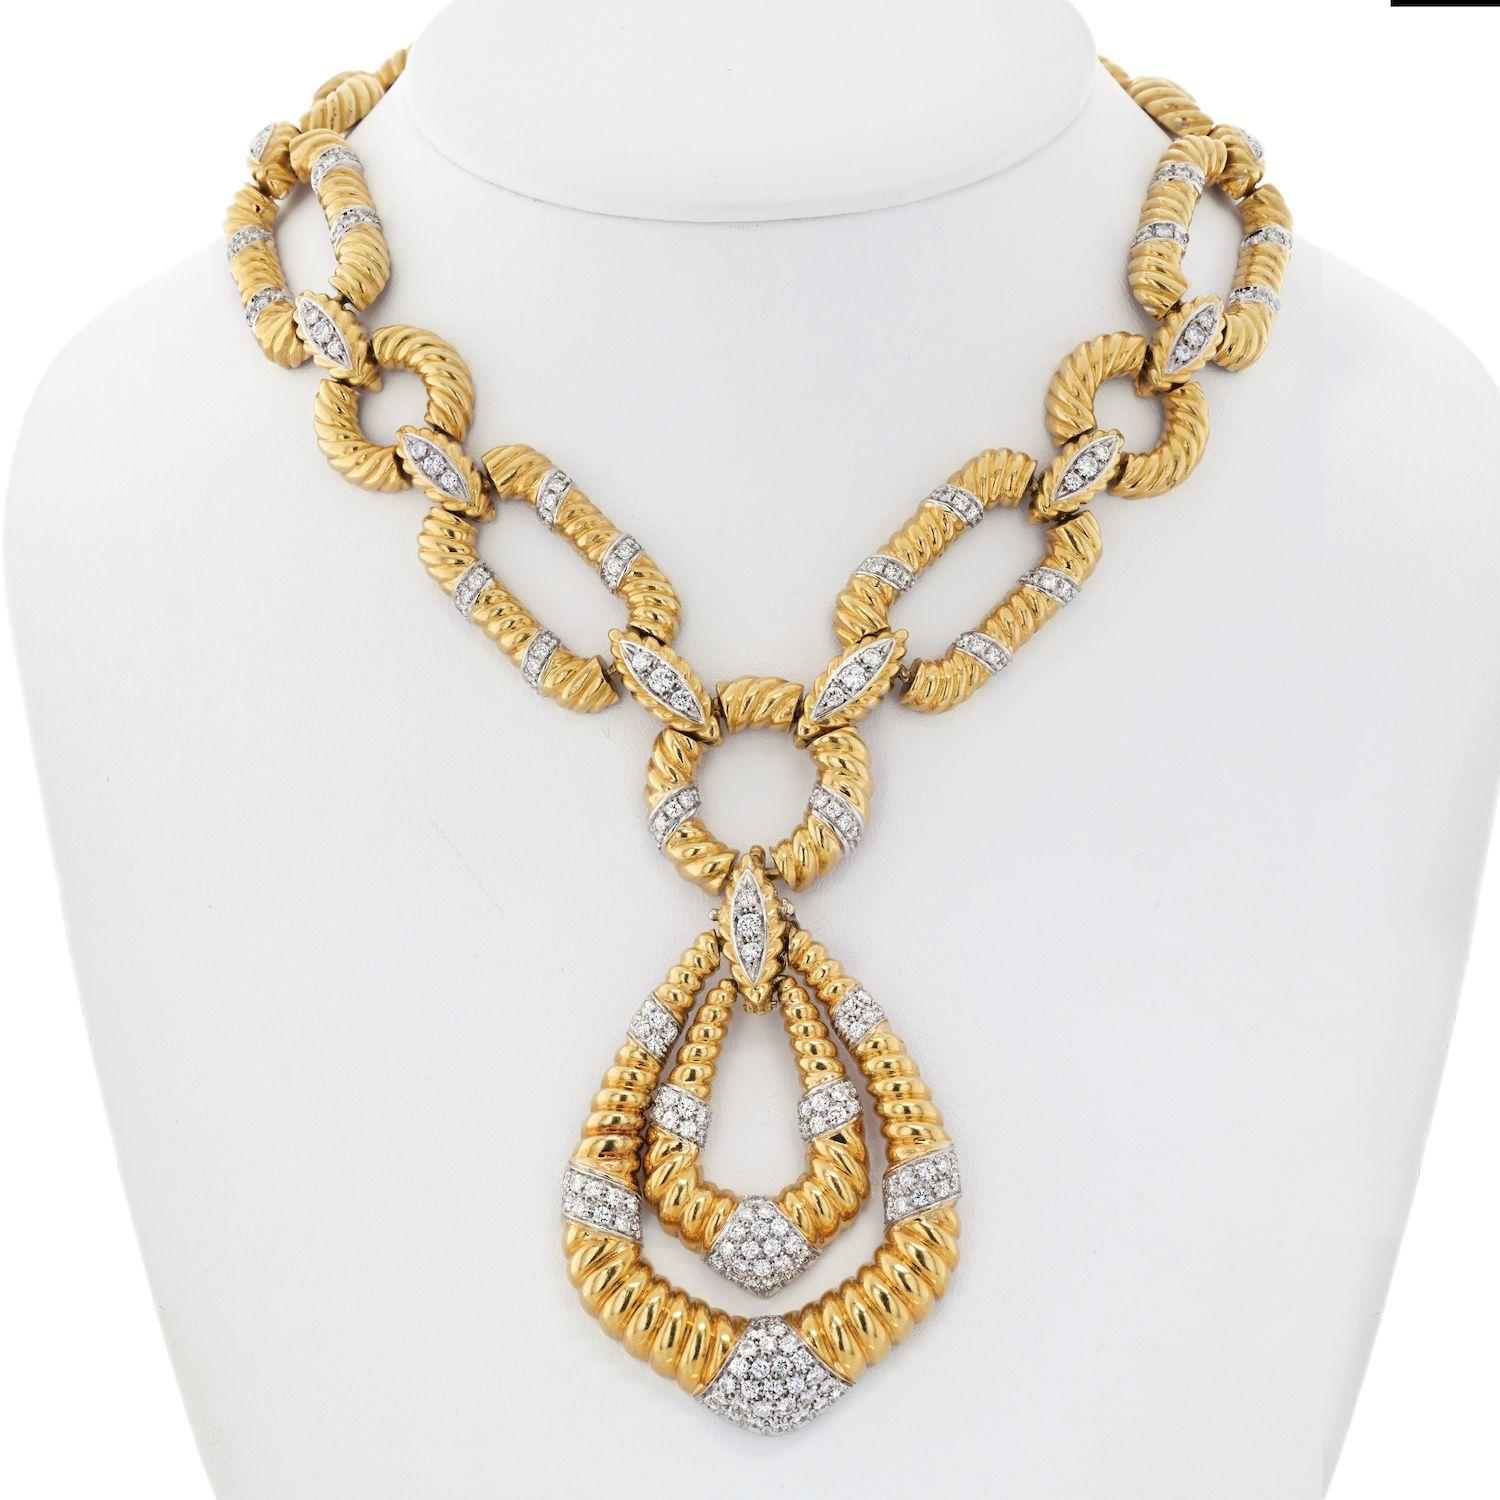 The dynamic geometric motifs are creatively fluted and completed by the double fluted open pendant. This necklace has a flexible swag of chunky links, while the polished gold is counterbalanced by a few contrasting lines of brilliant-cut diamonds.